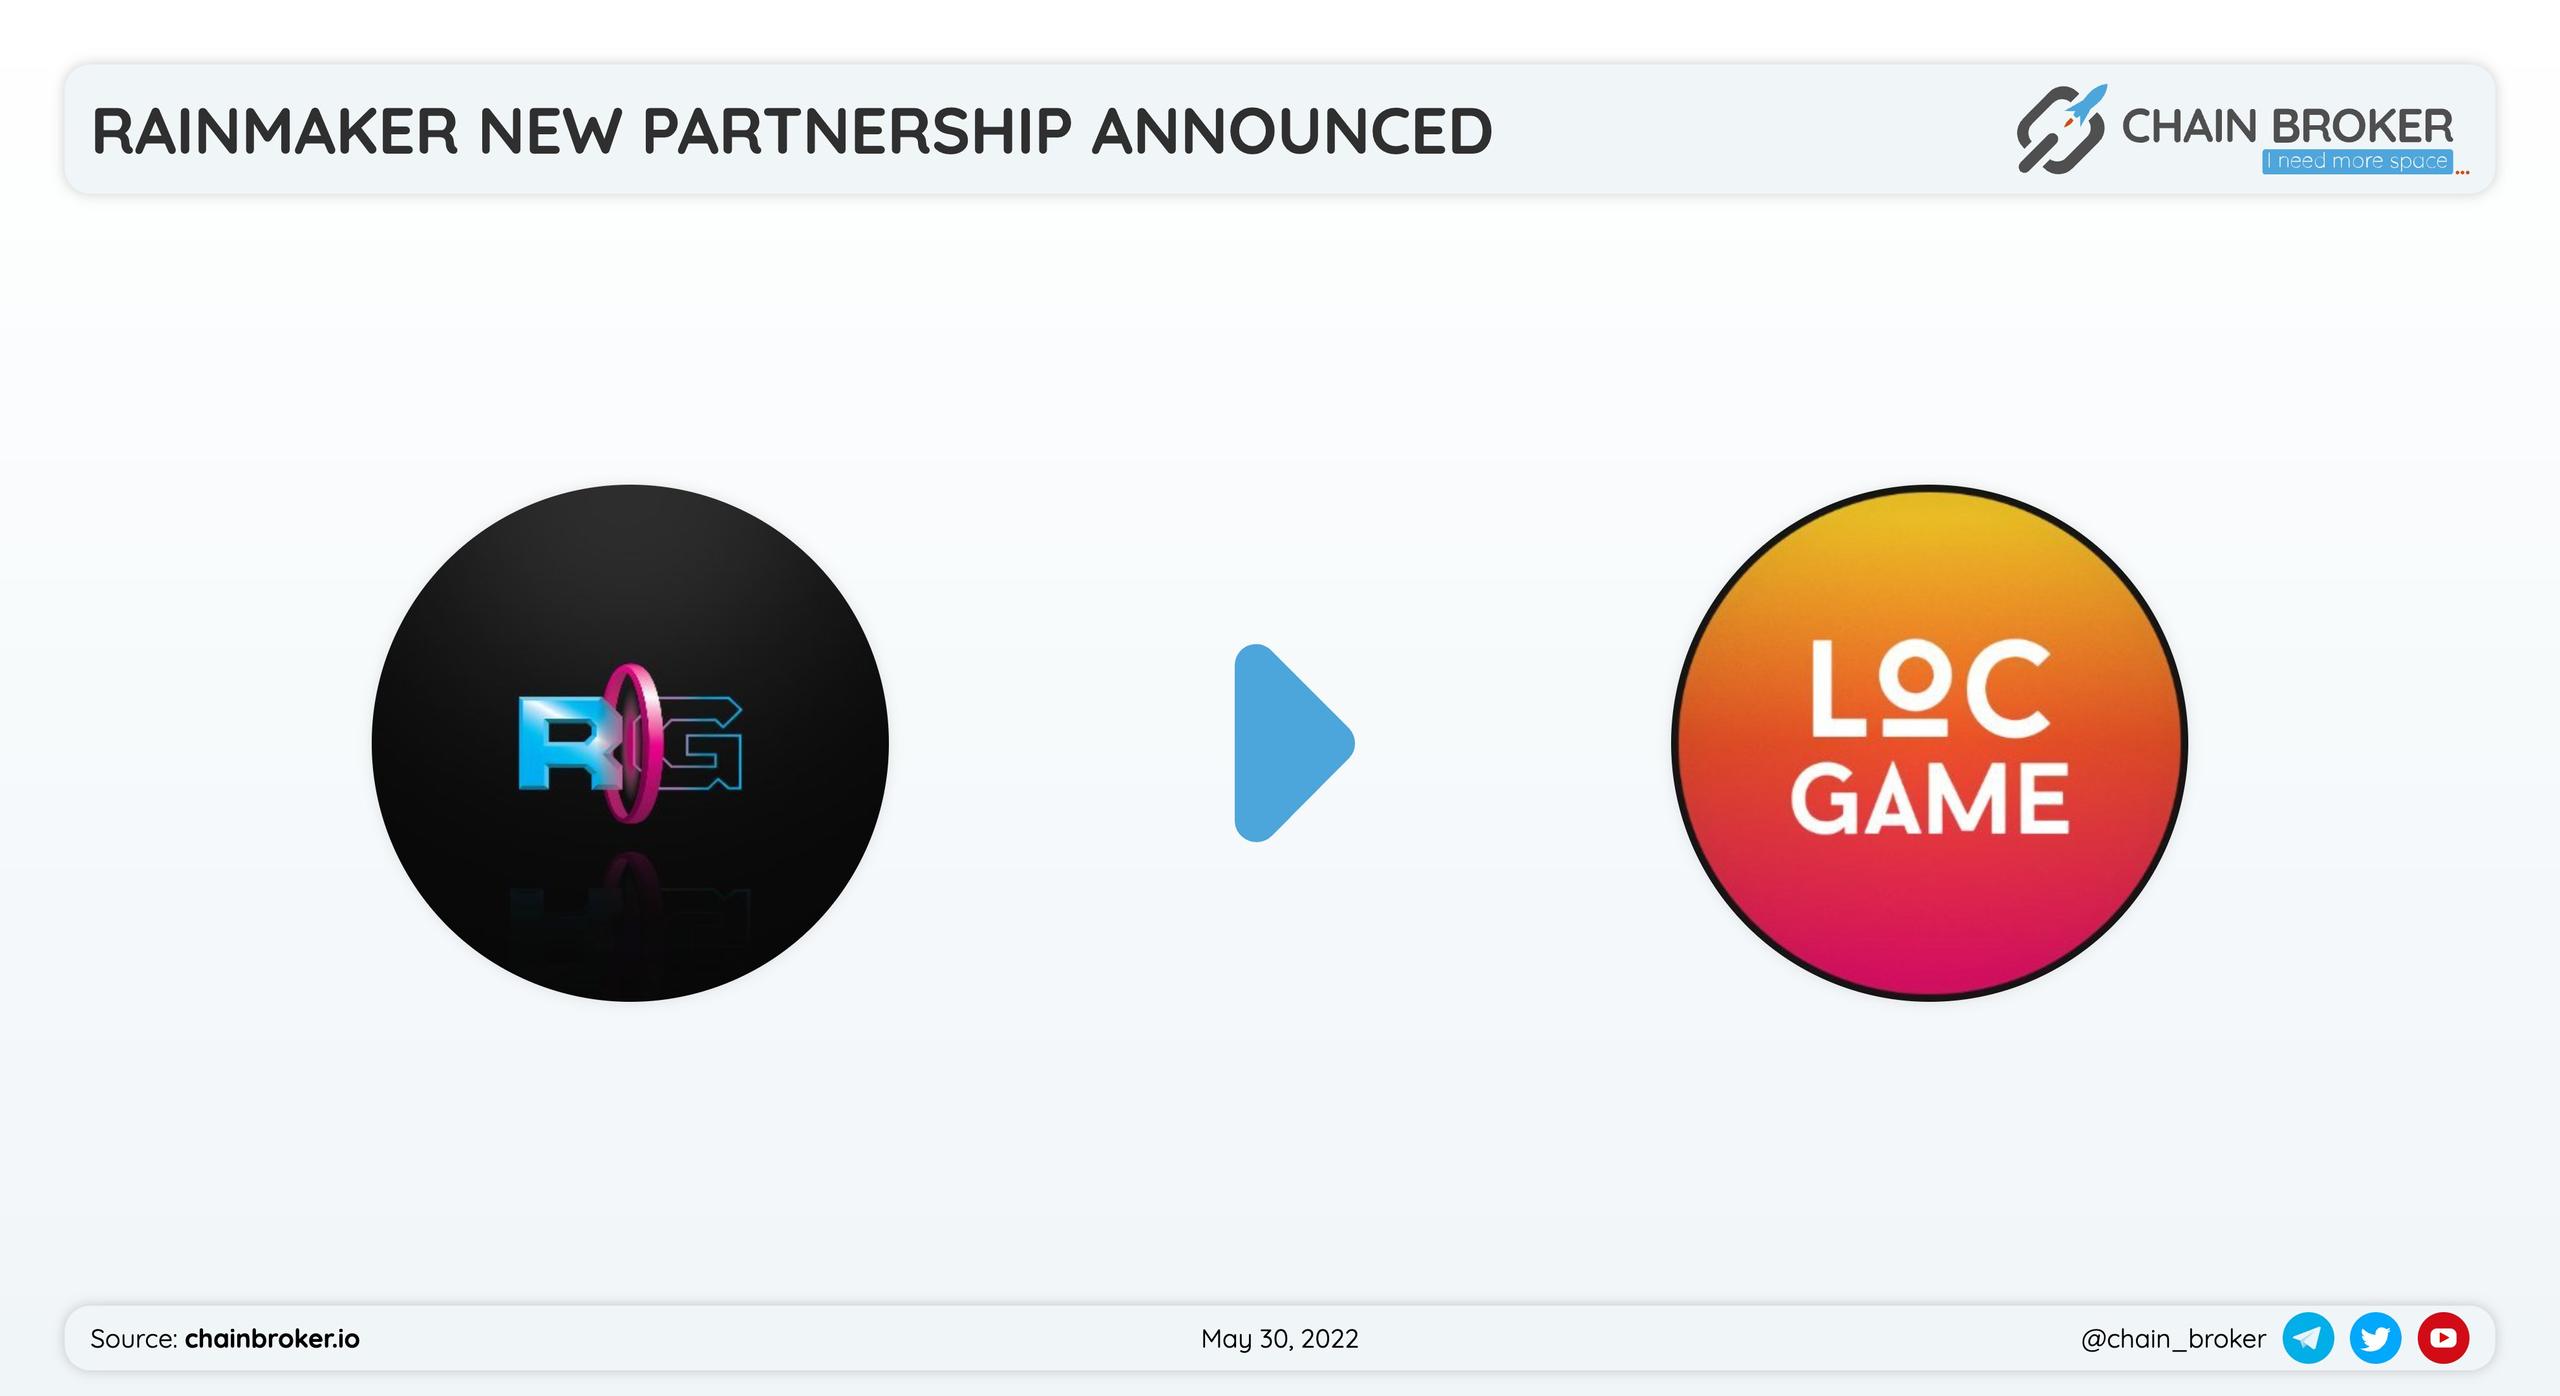 Rainmaker has partnered with LoC Game